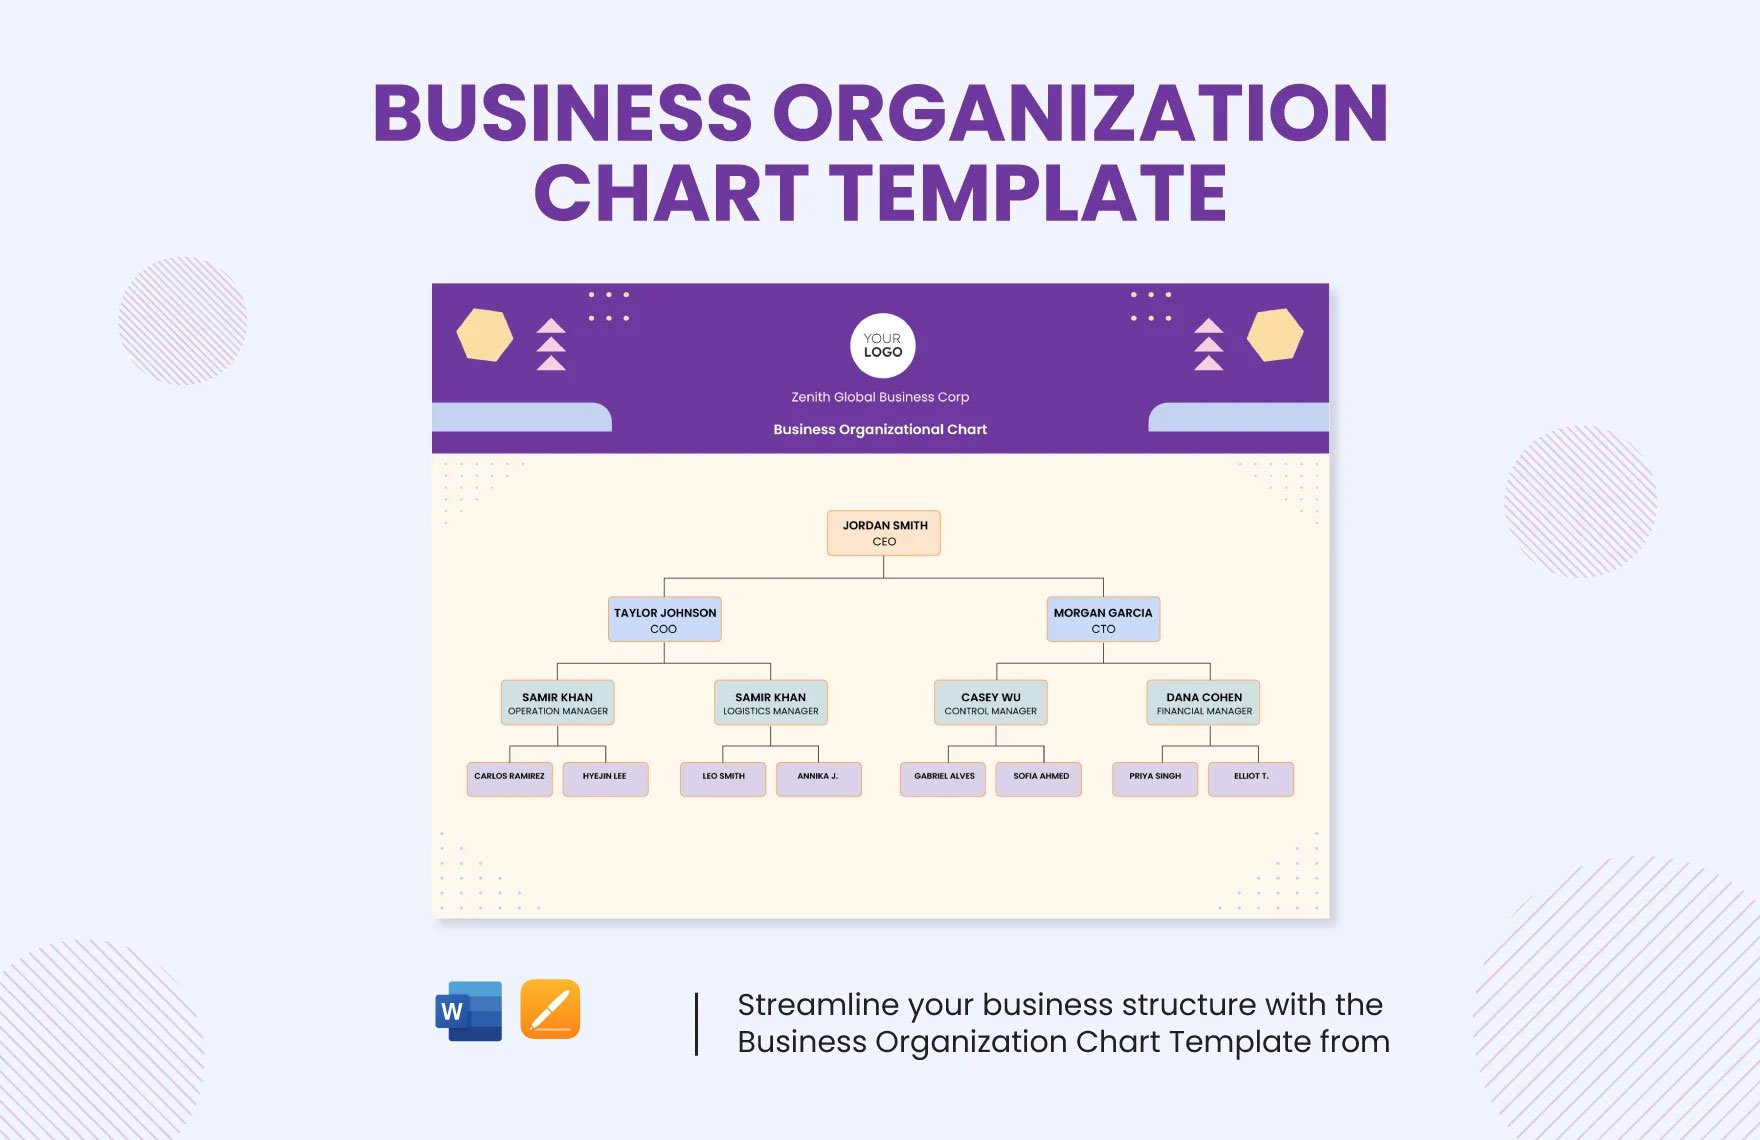 Free Business Organization Chart Template in Word, Apple Pages